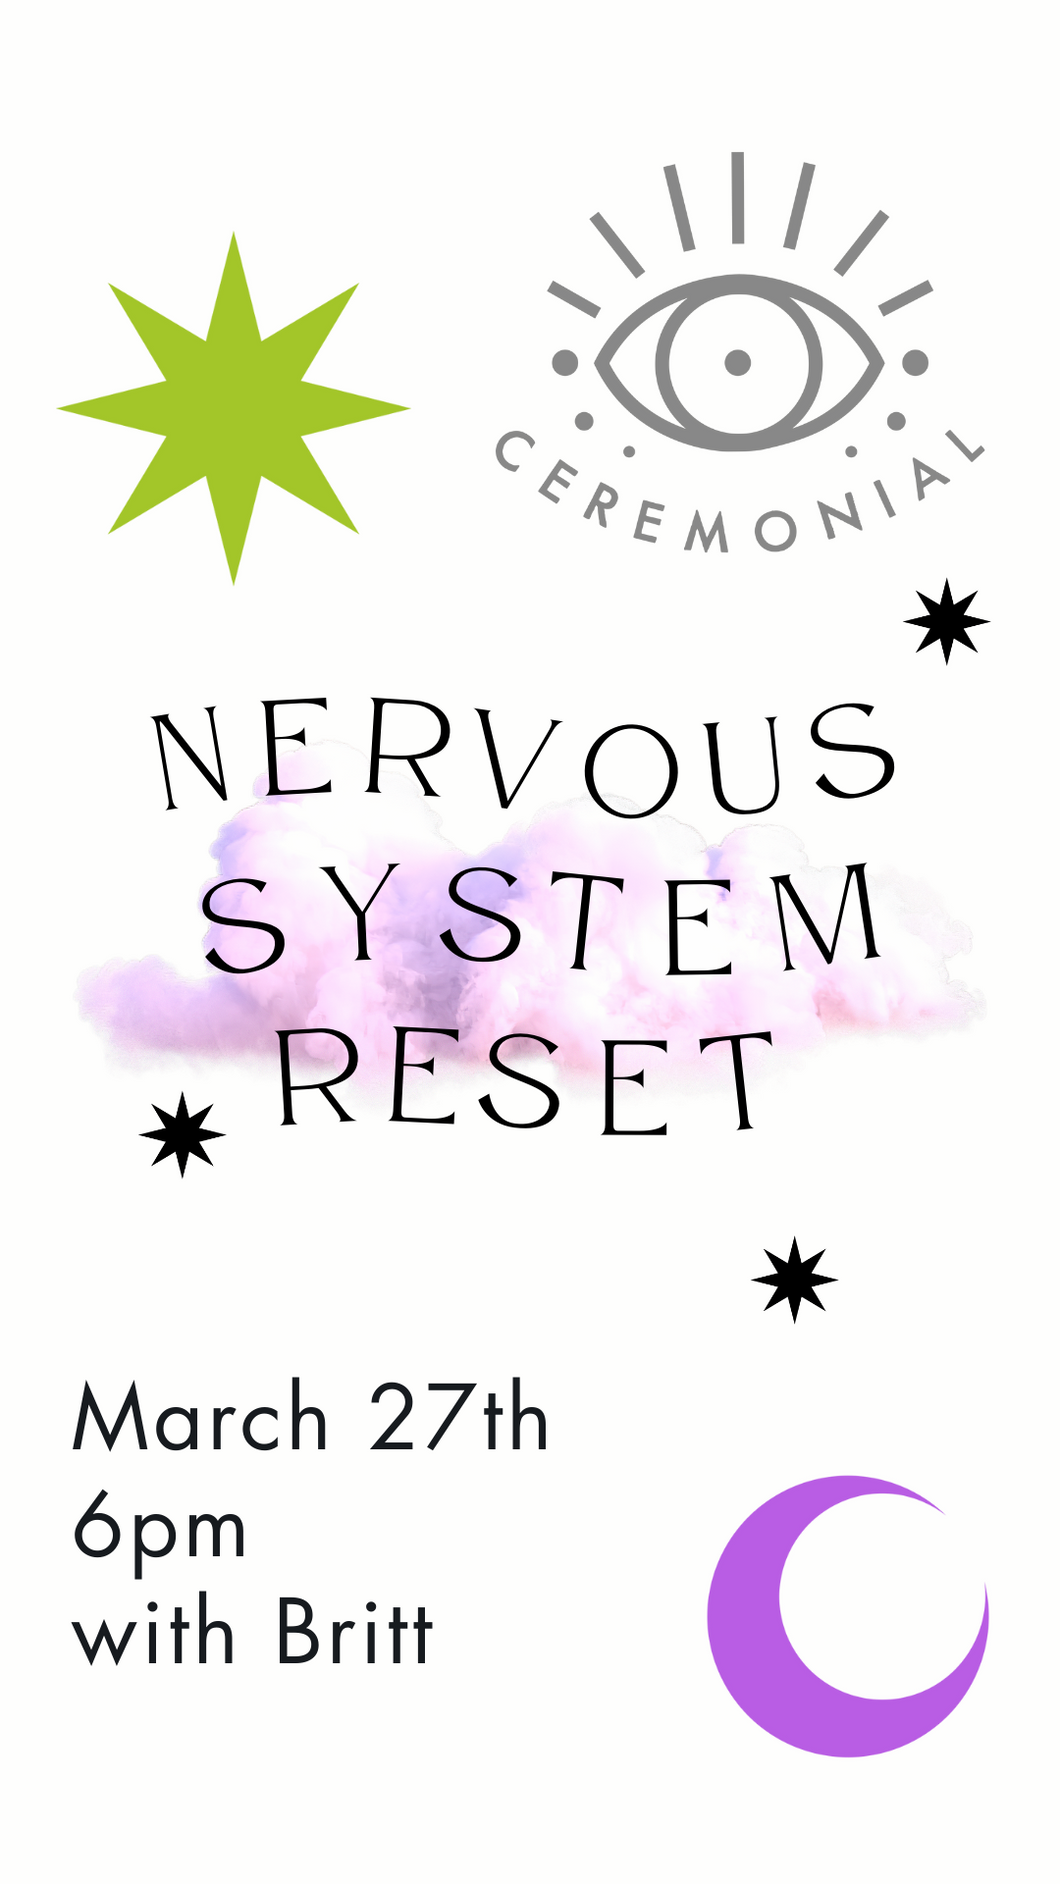 Nervous System Reset with Britt, Wednesday March 27th, 6pm